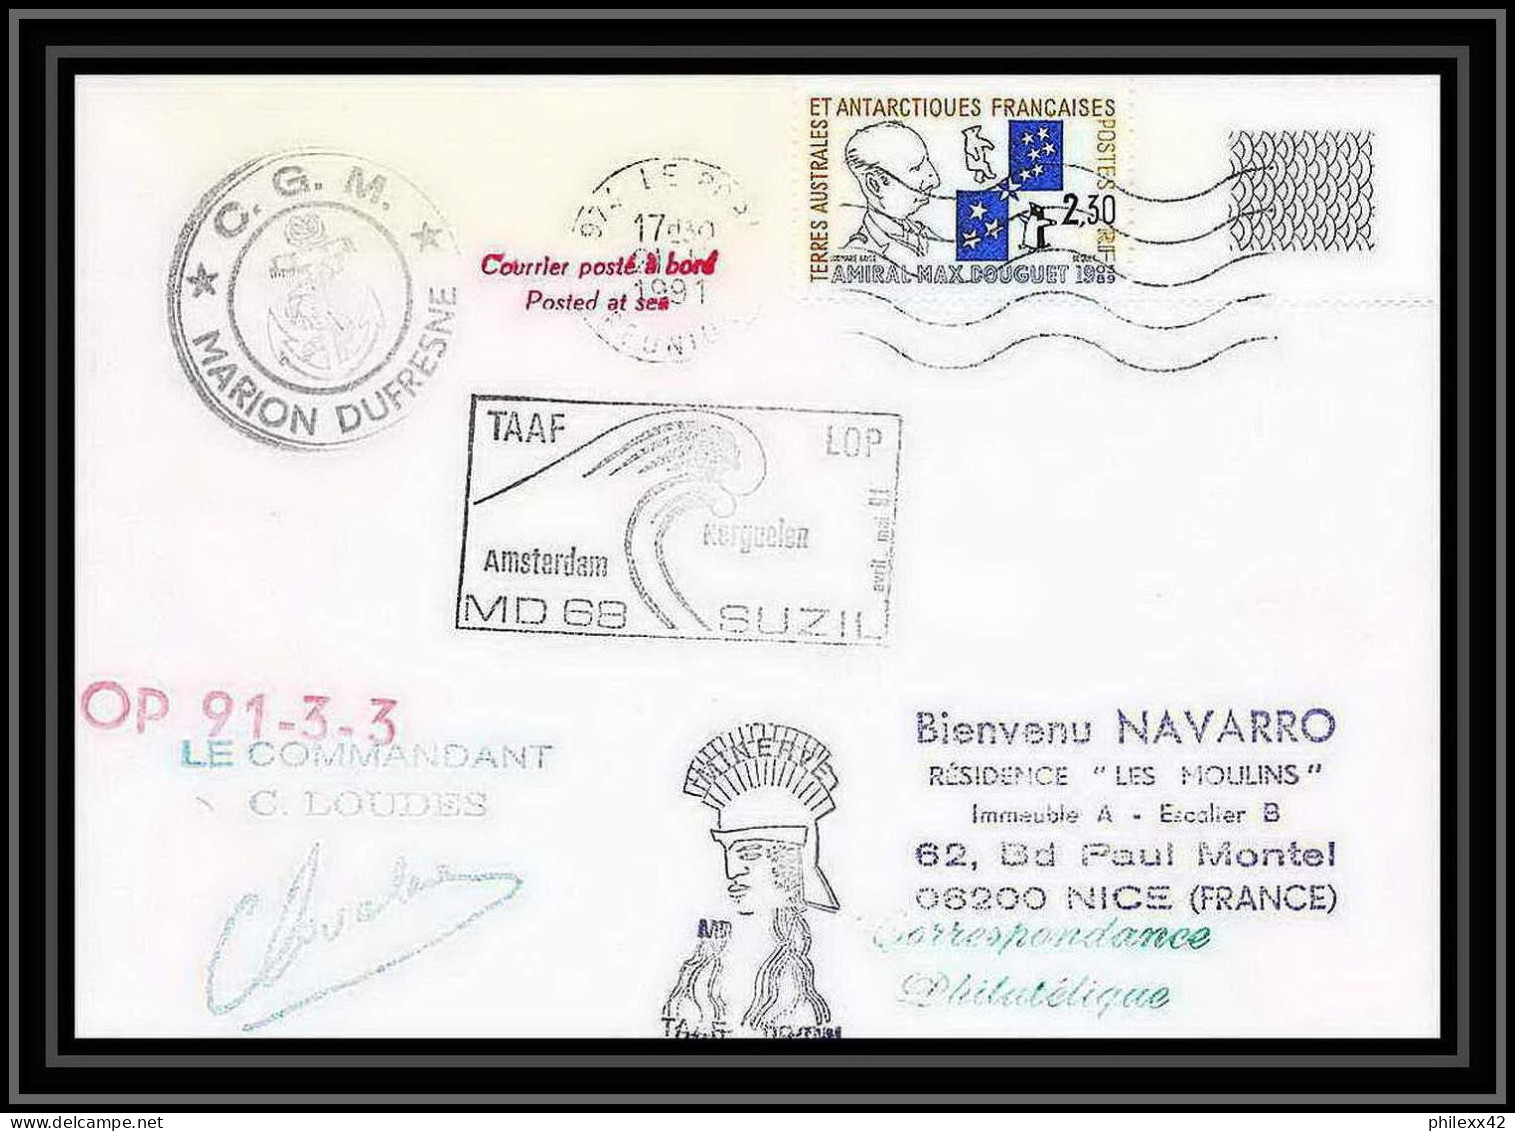 1763 Md 68 Op 91-3-3 Suzil Signé Signed Loudes Marion Dufresne 21/5/1991 TAAF Antarctic Terres Australes Lettre (cover) - Antarktis-Expeditionen